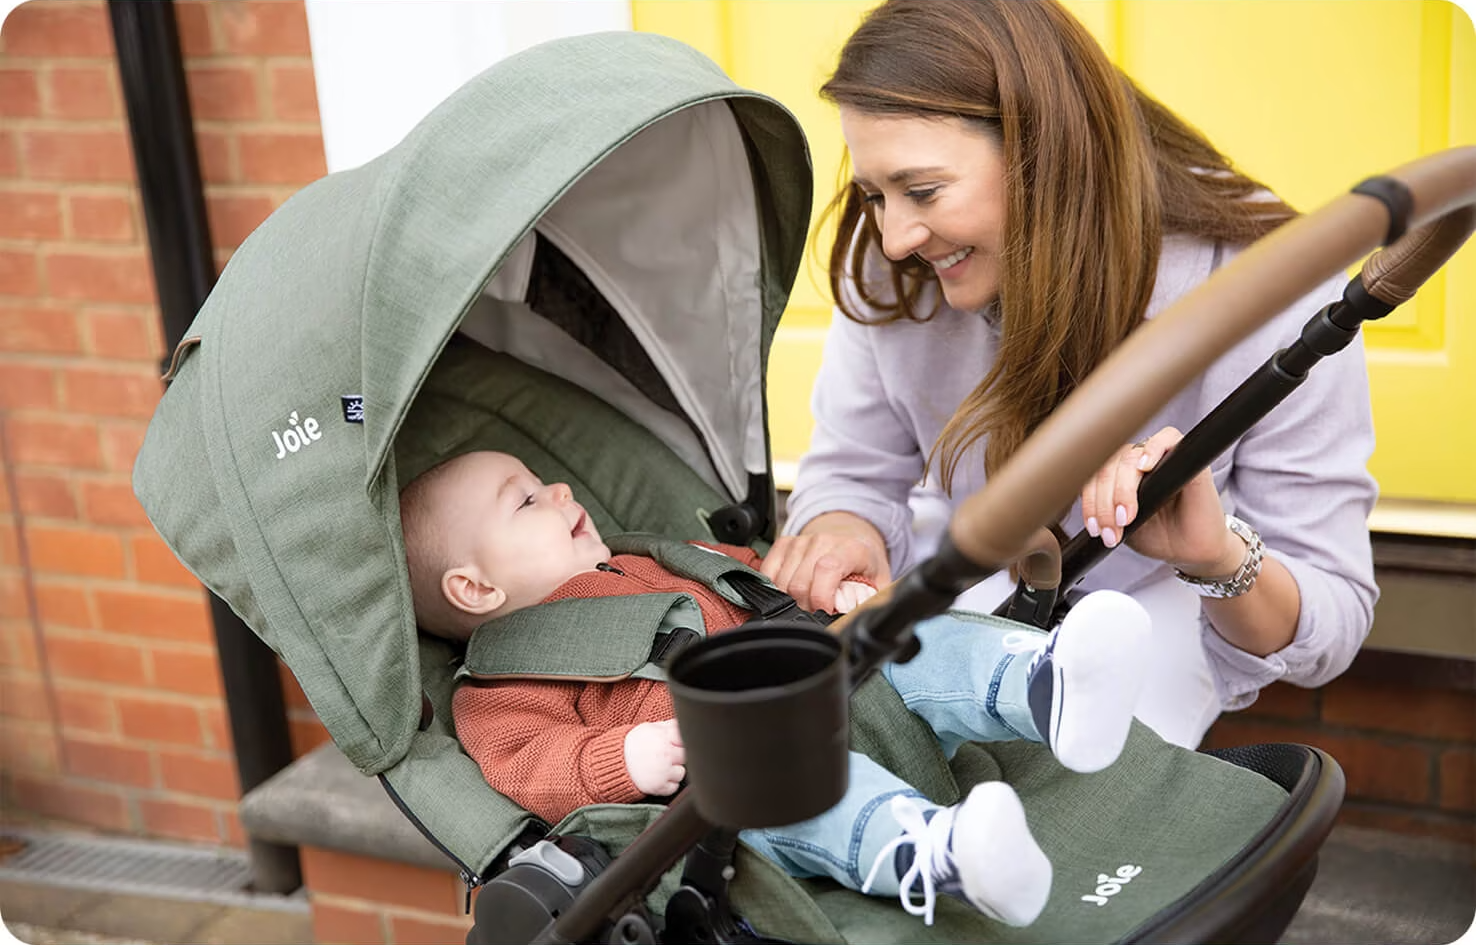 How To Choose A "Perfect" Stroller For Your Family